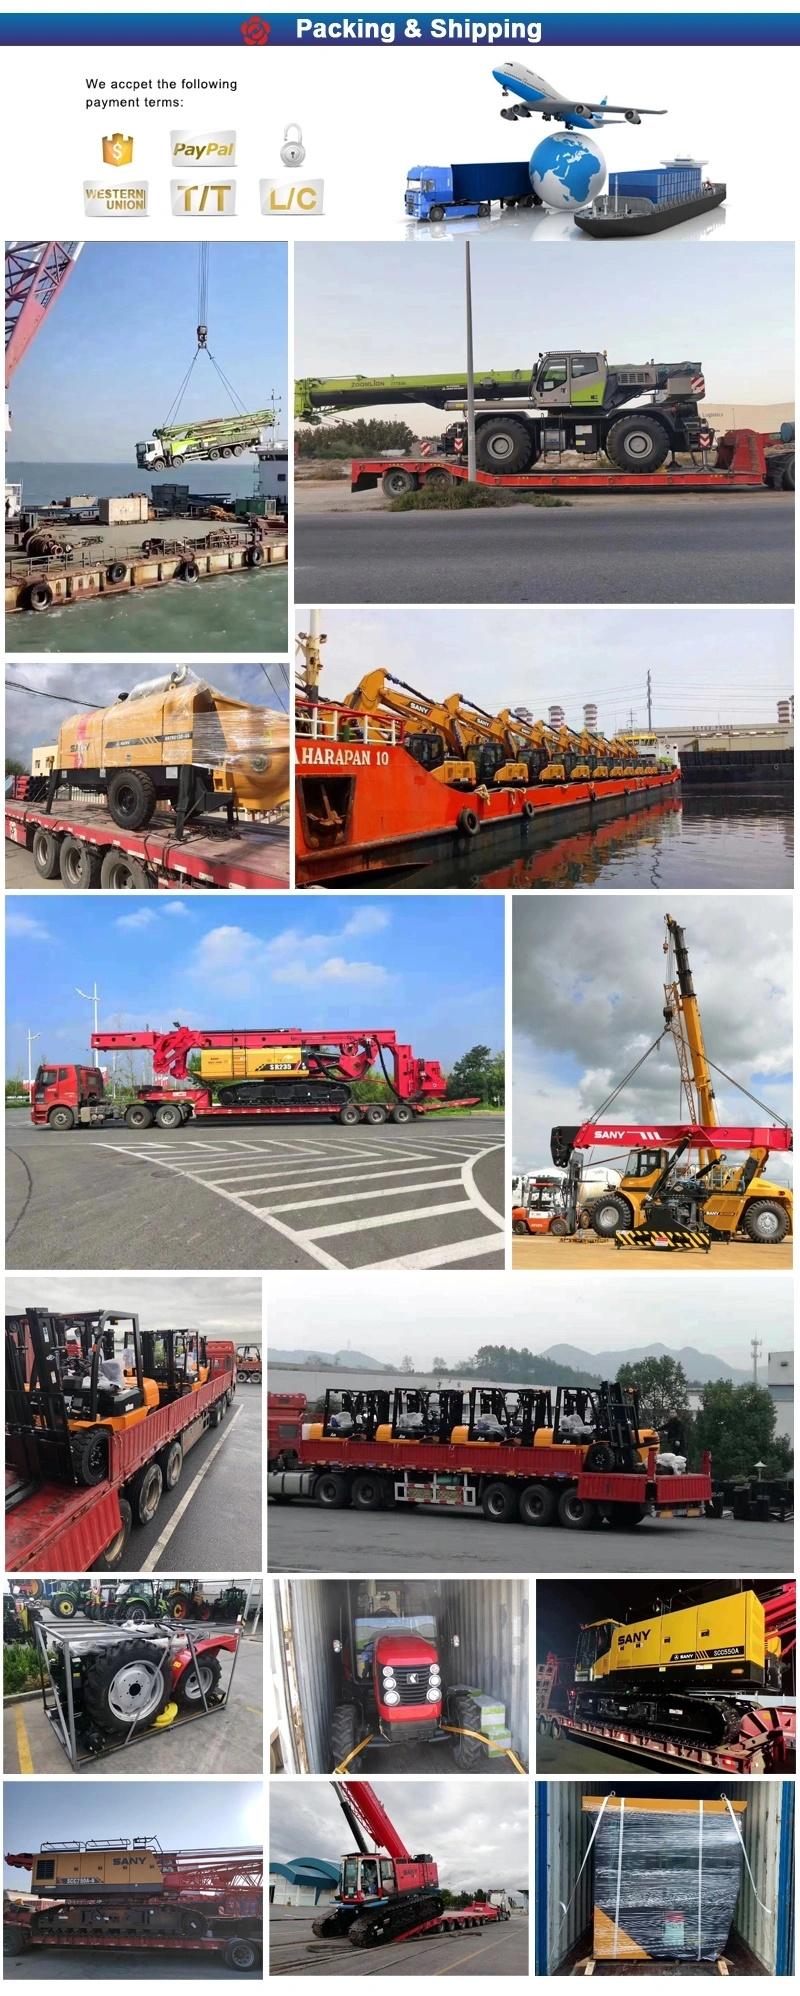 Ebz Series Mining/Tunneling Machine Cantilever Type Roadheader High Quality Mining and Tunneling Construction Tools